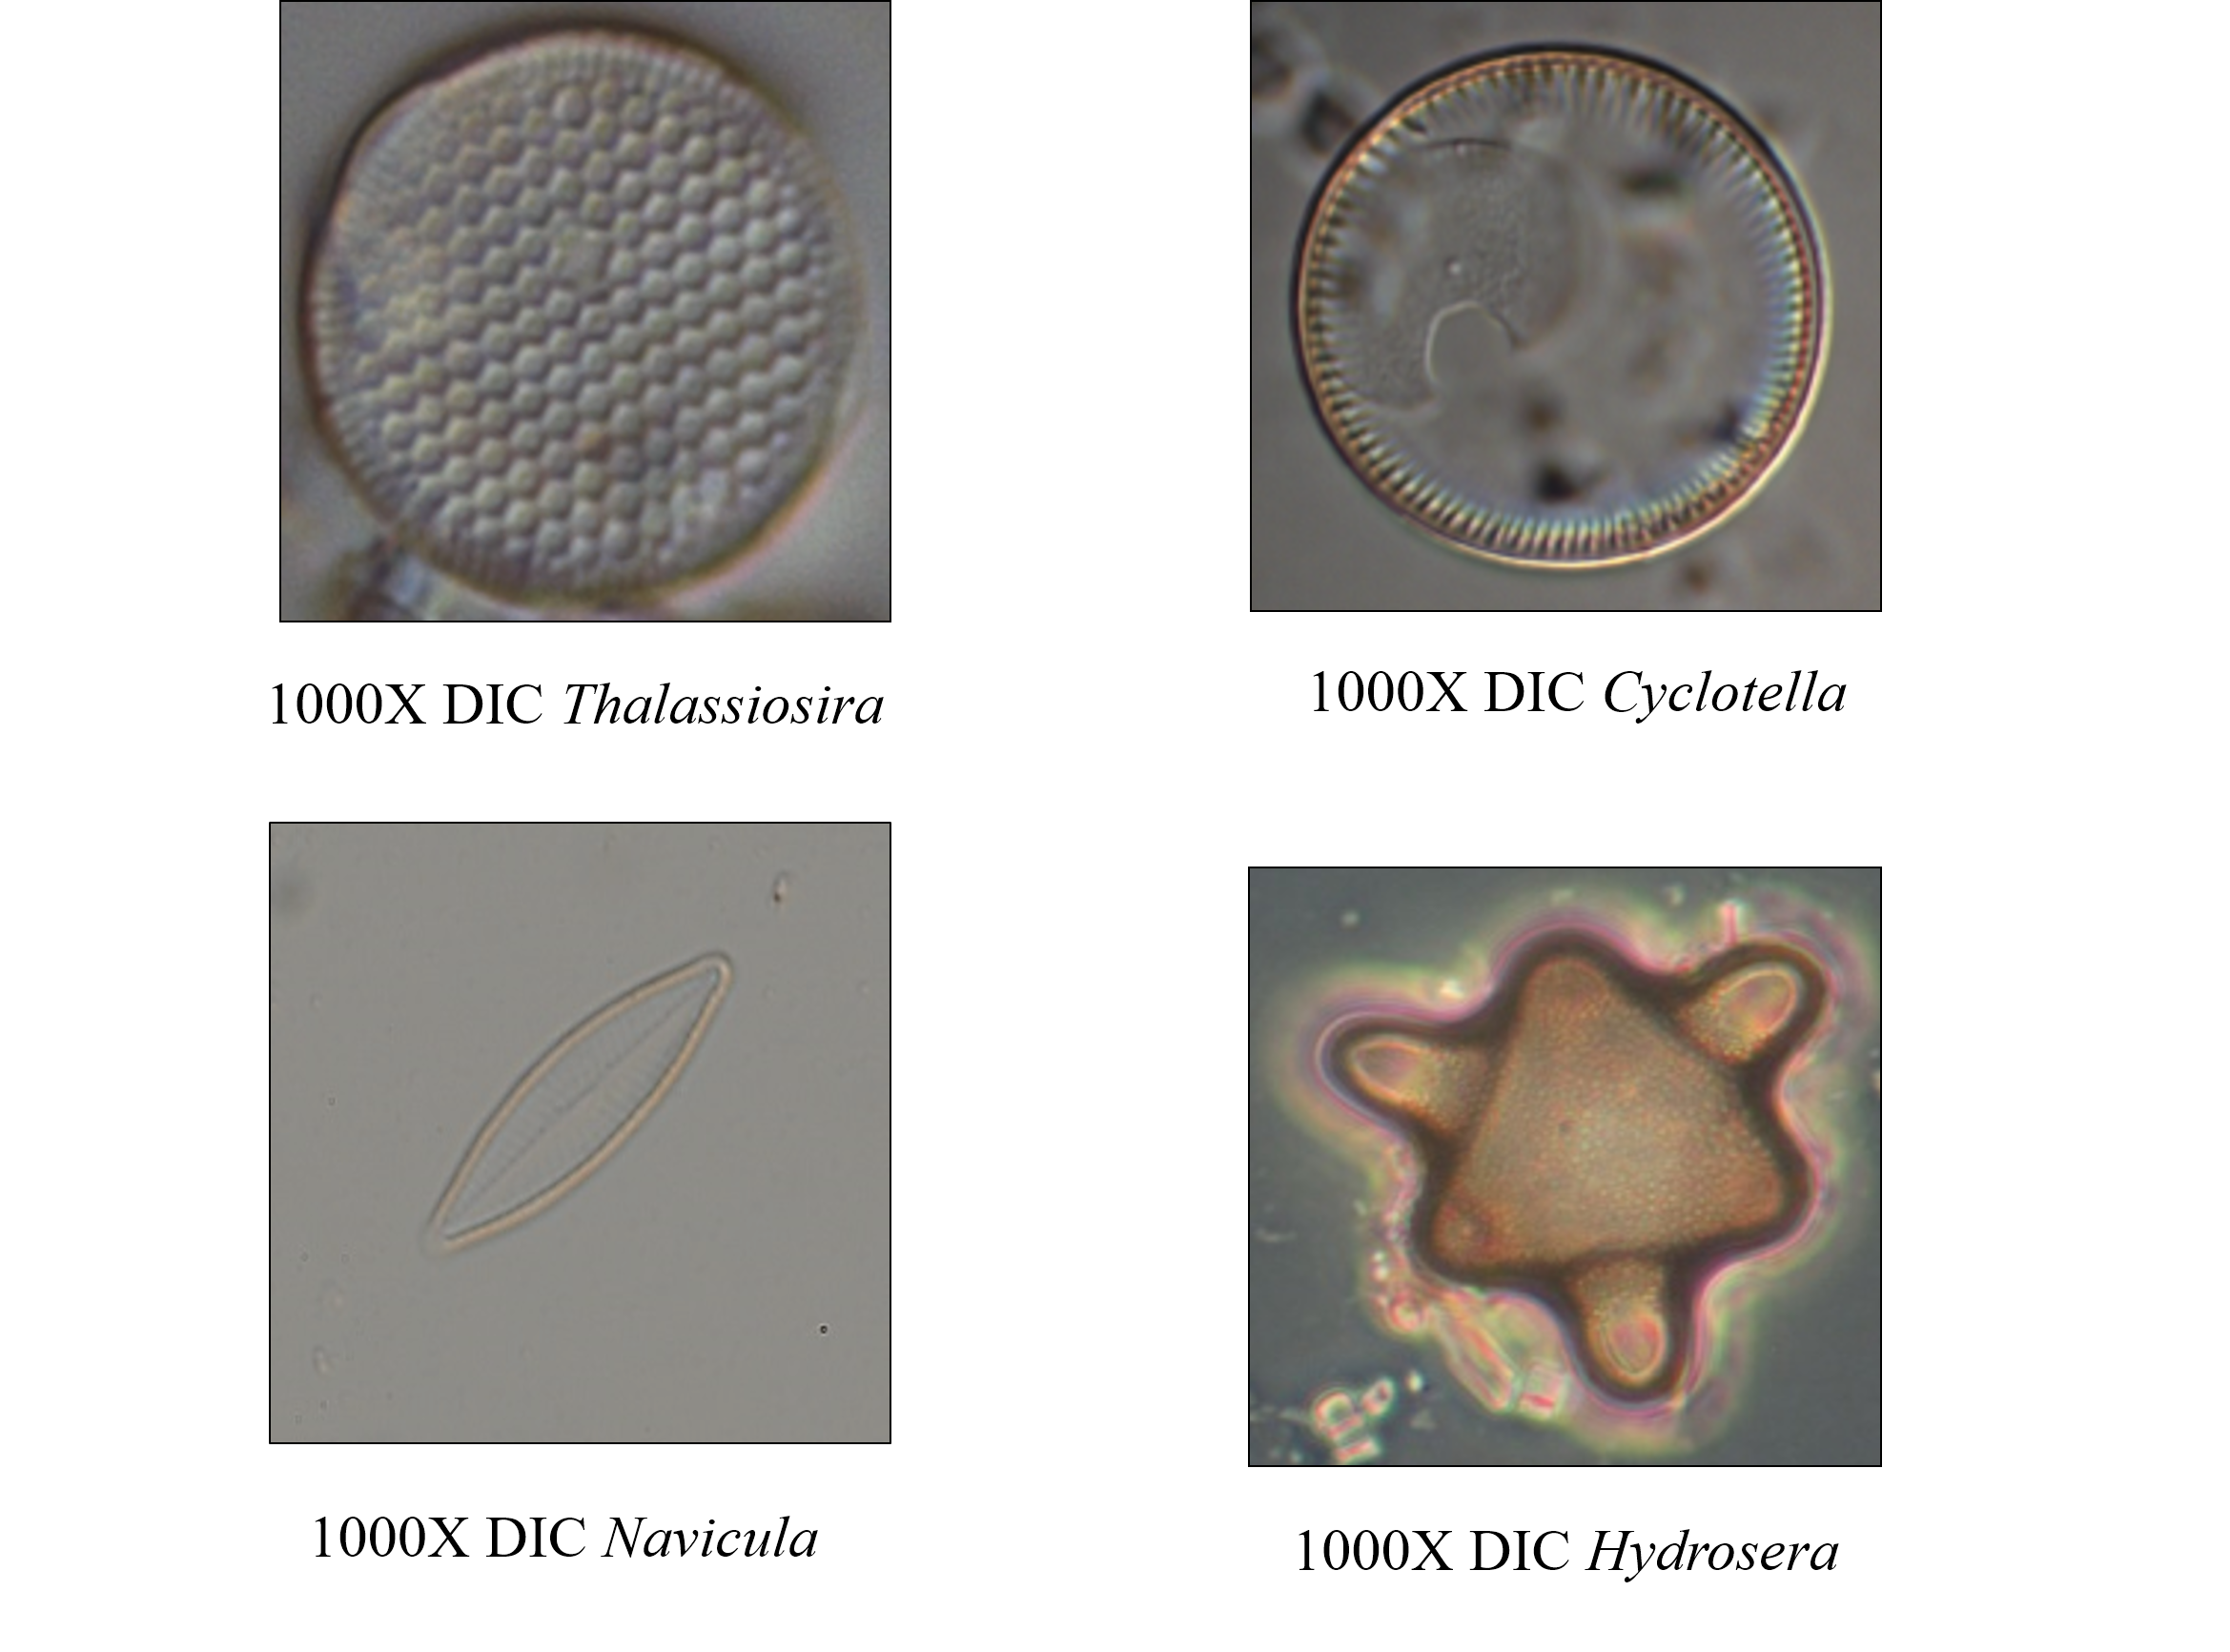 Figure 2：Diatoms under differential interference contrast (DIC) microscope